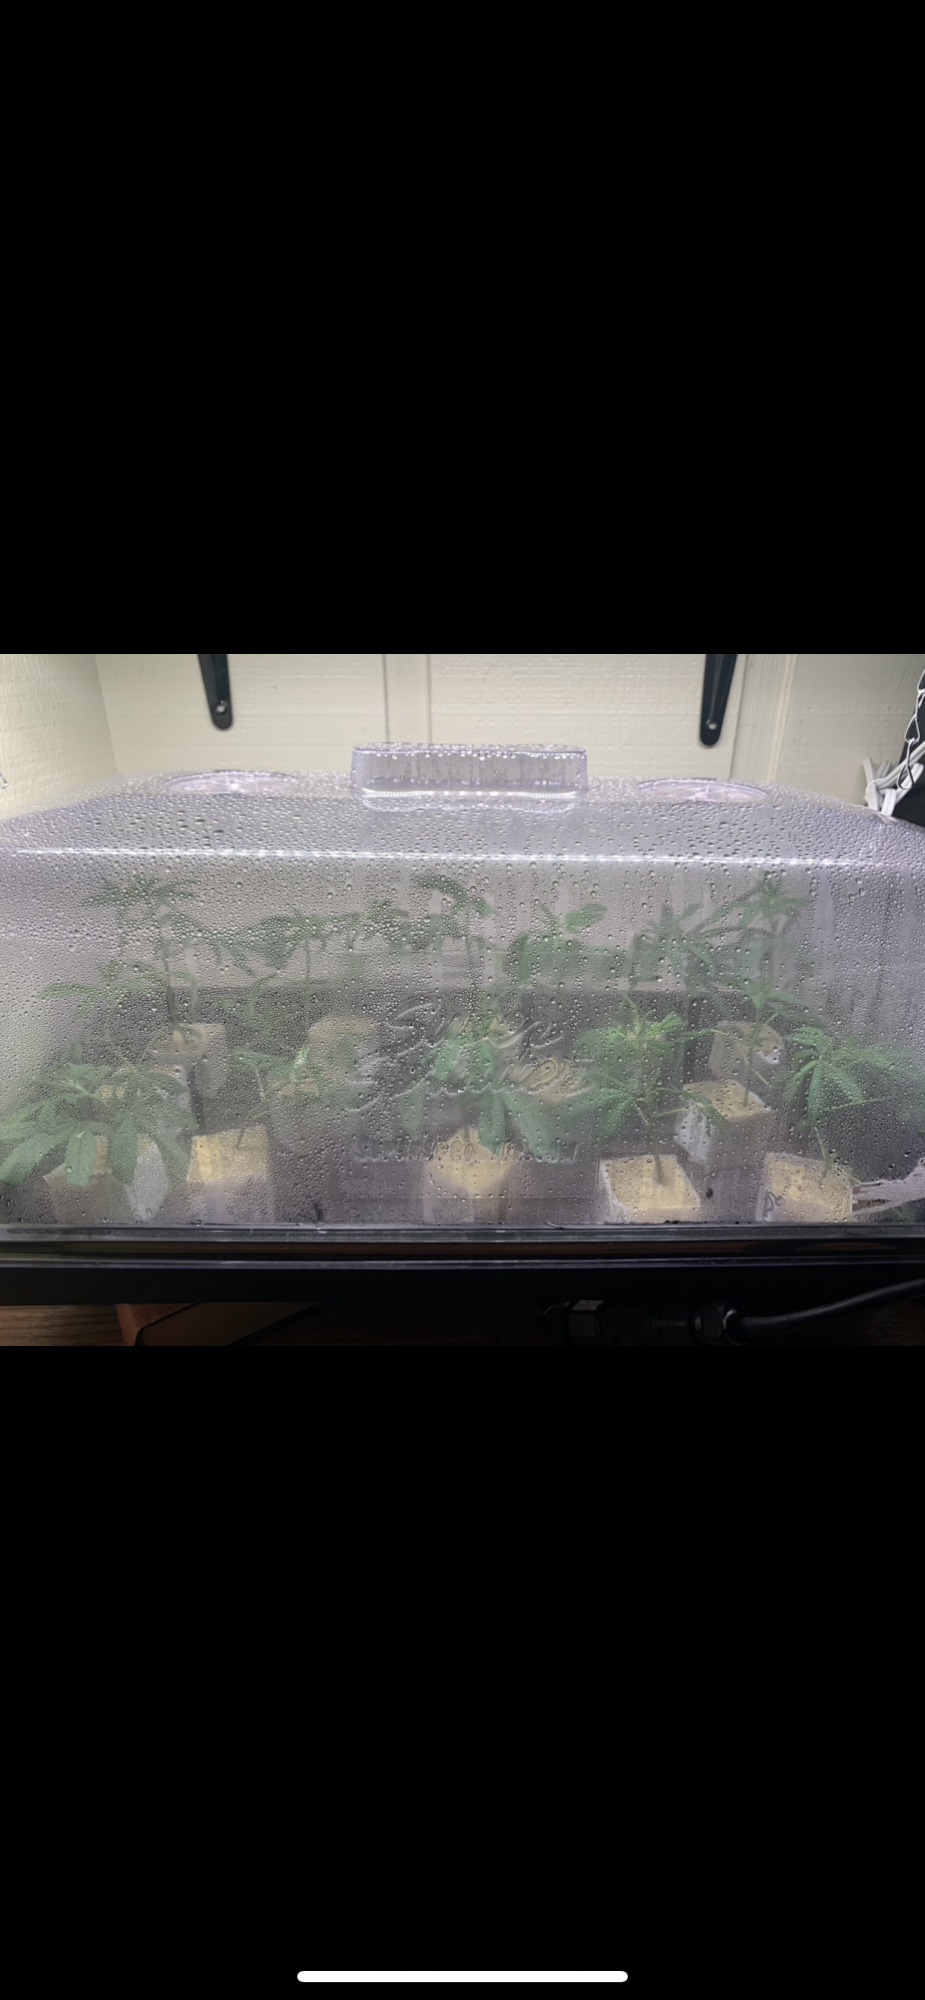 First time cloning day 1 lumens lux watts ppfds im beyond confused  and starting to think my l 5